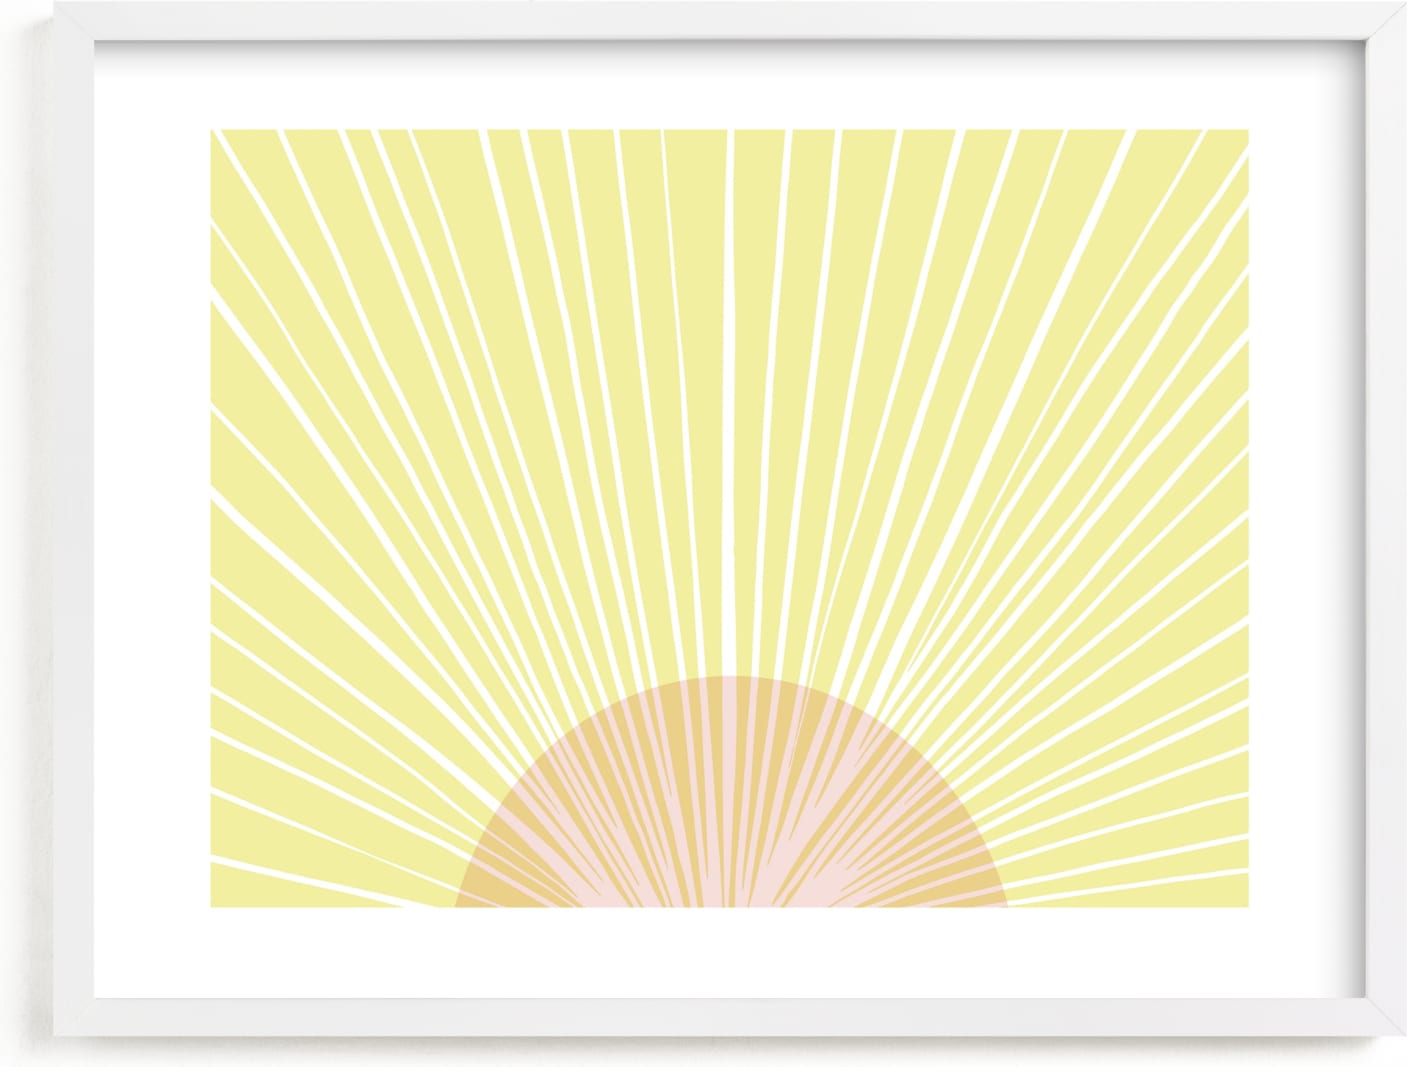 This is a yellow kids wall art by Kerry Doyle called Pastel Sunrise.